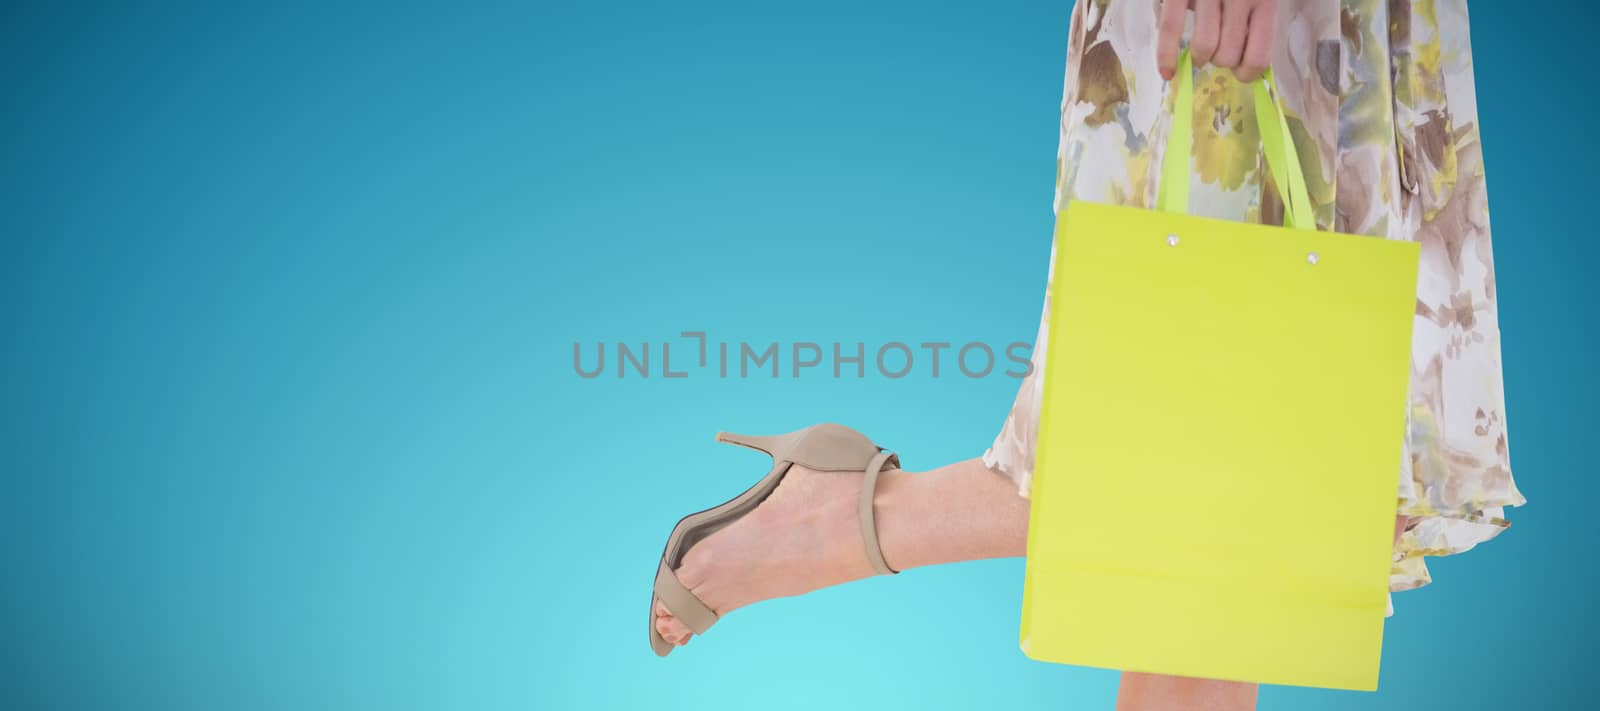 Elegant woman holding shopping bag against abstract blue background